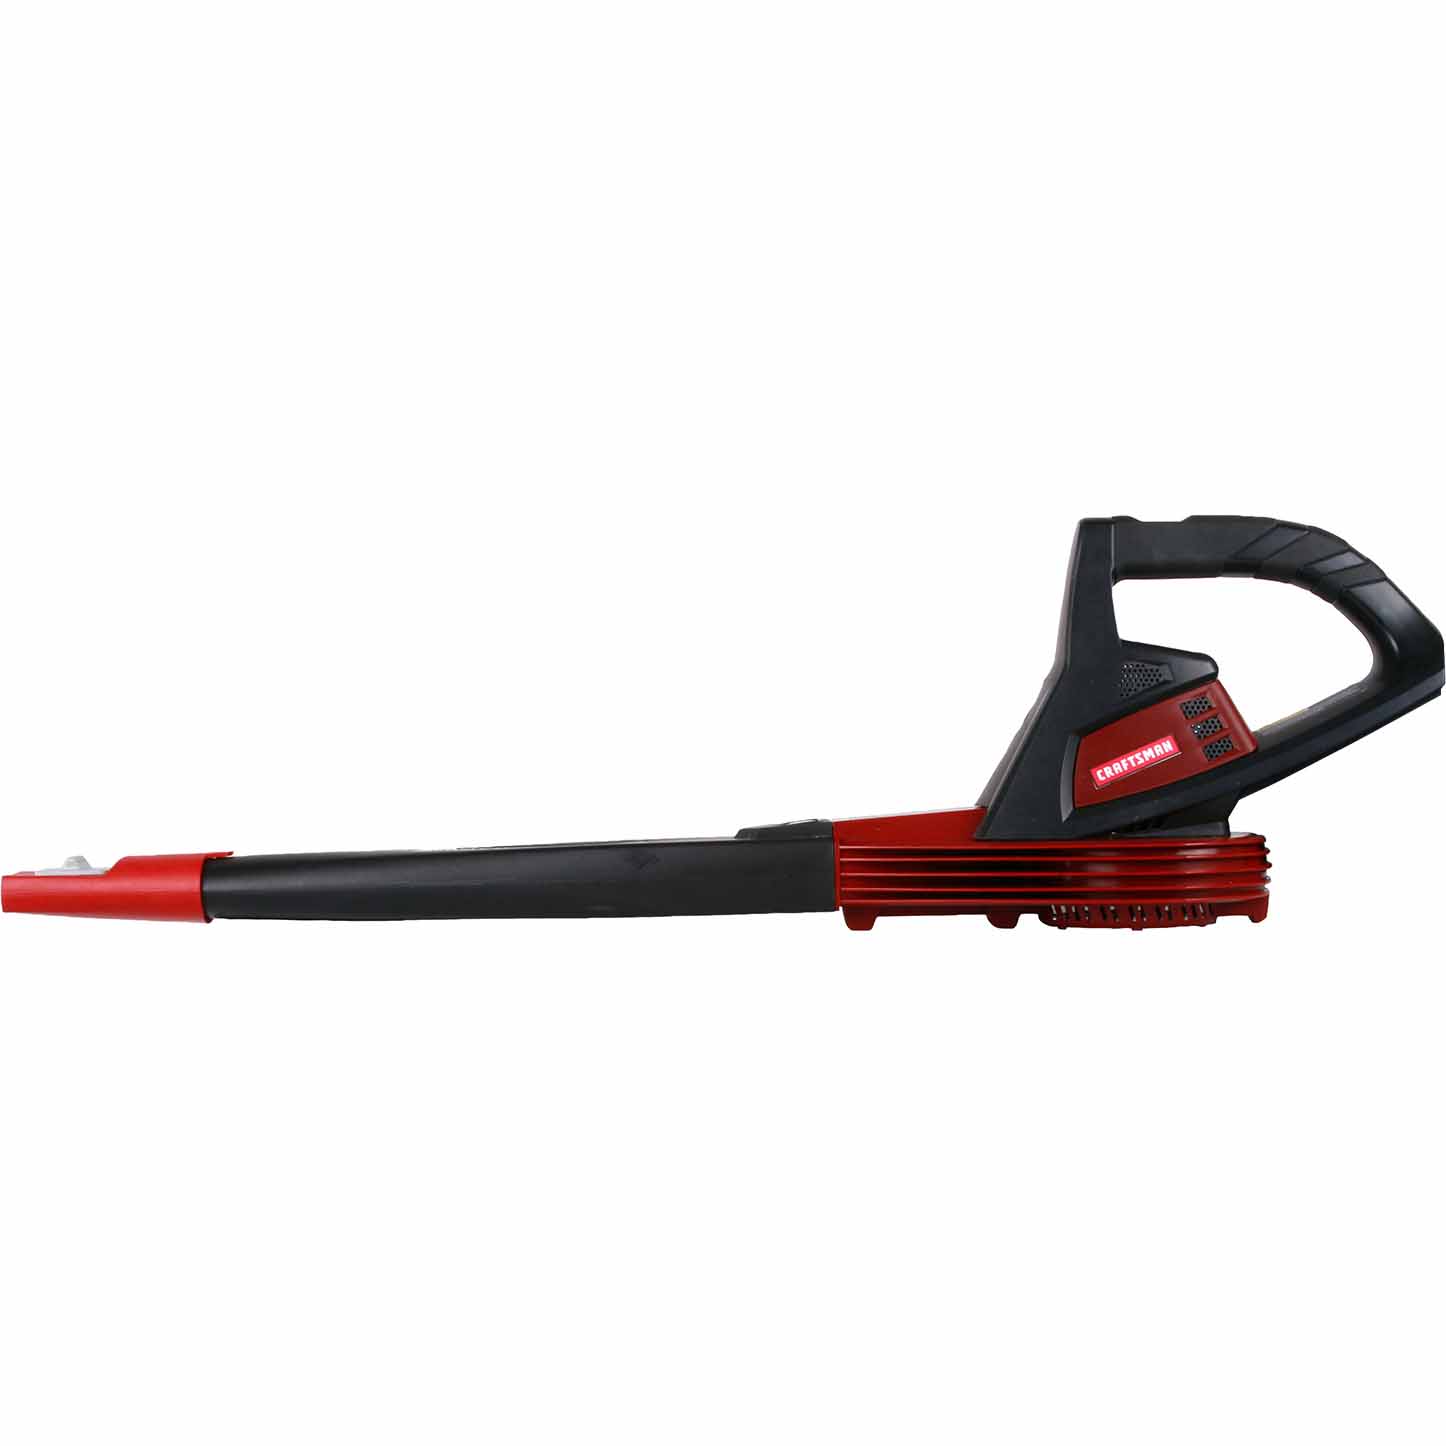 Craftsman 2400001 40V Cordless Blower - Battery and Charger sold separately